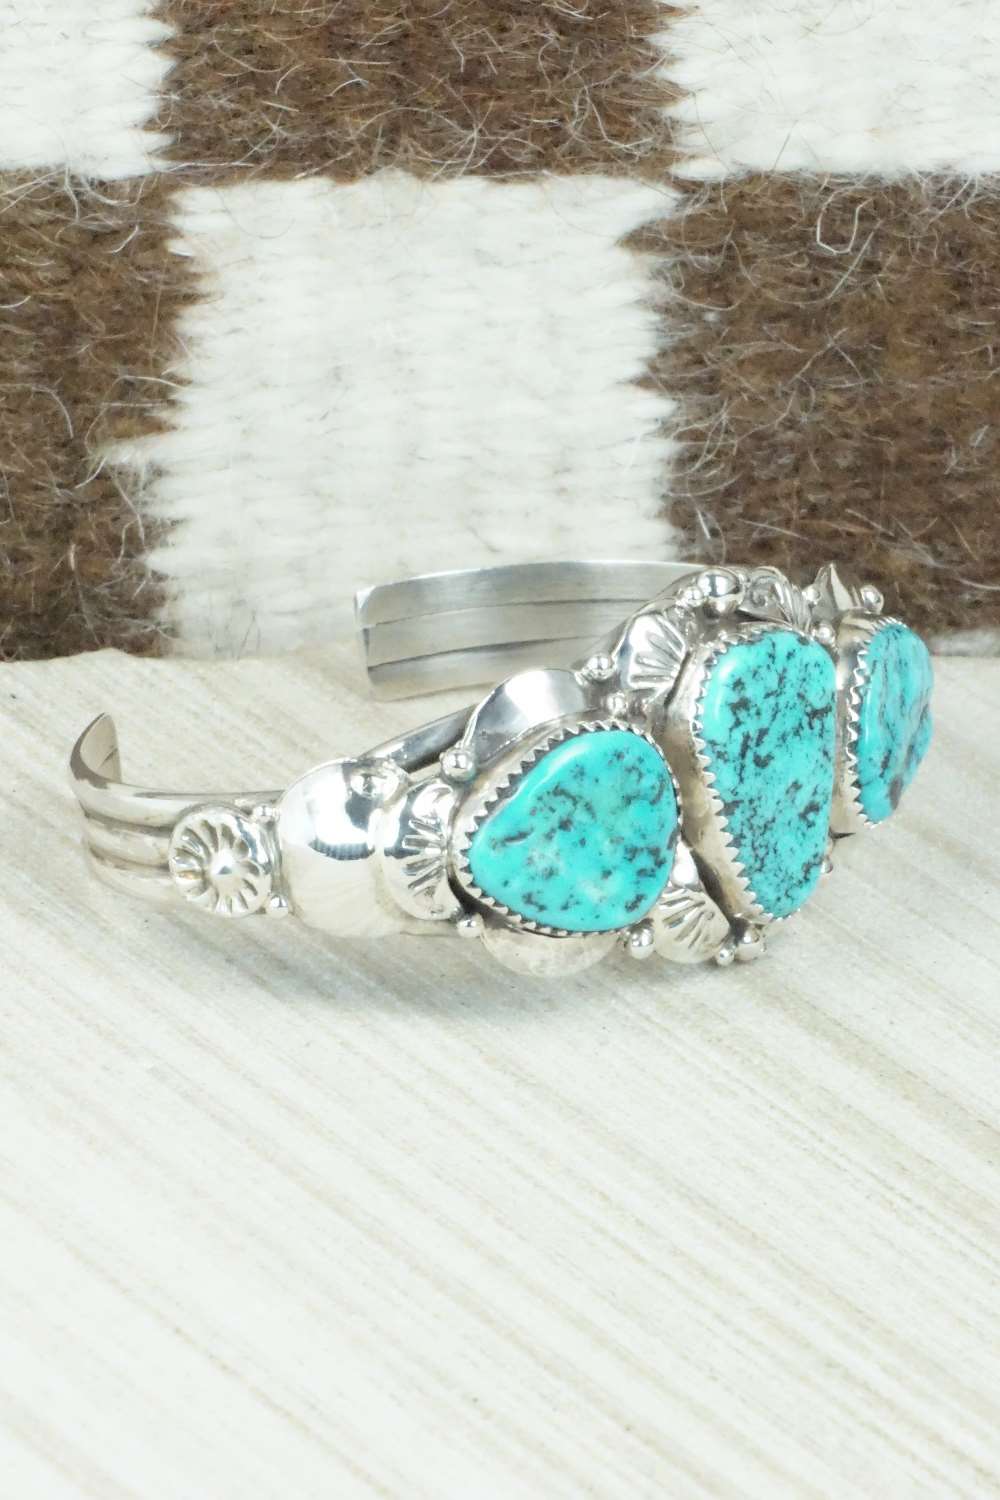 Turquoise and Sterling Silver Bracelet & Ring Set - Clem Nalwood - Size 7